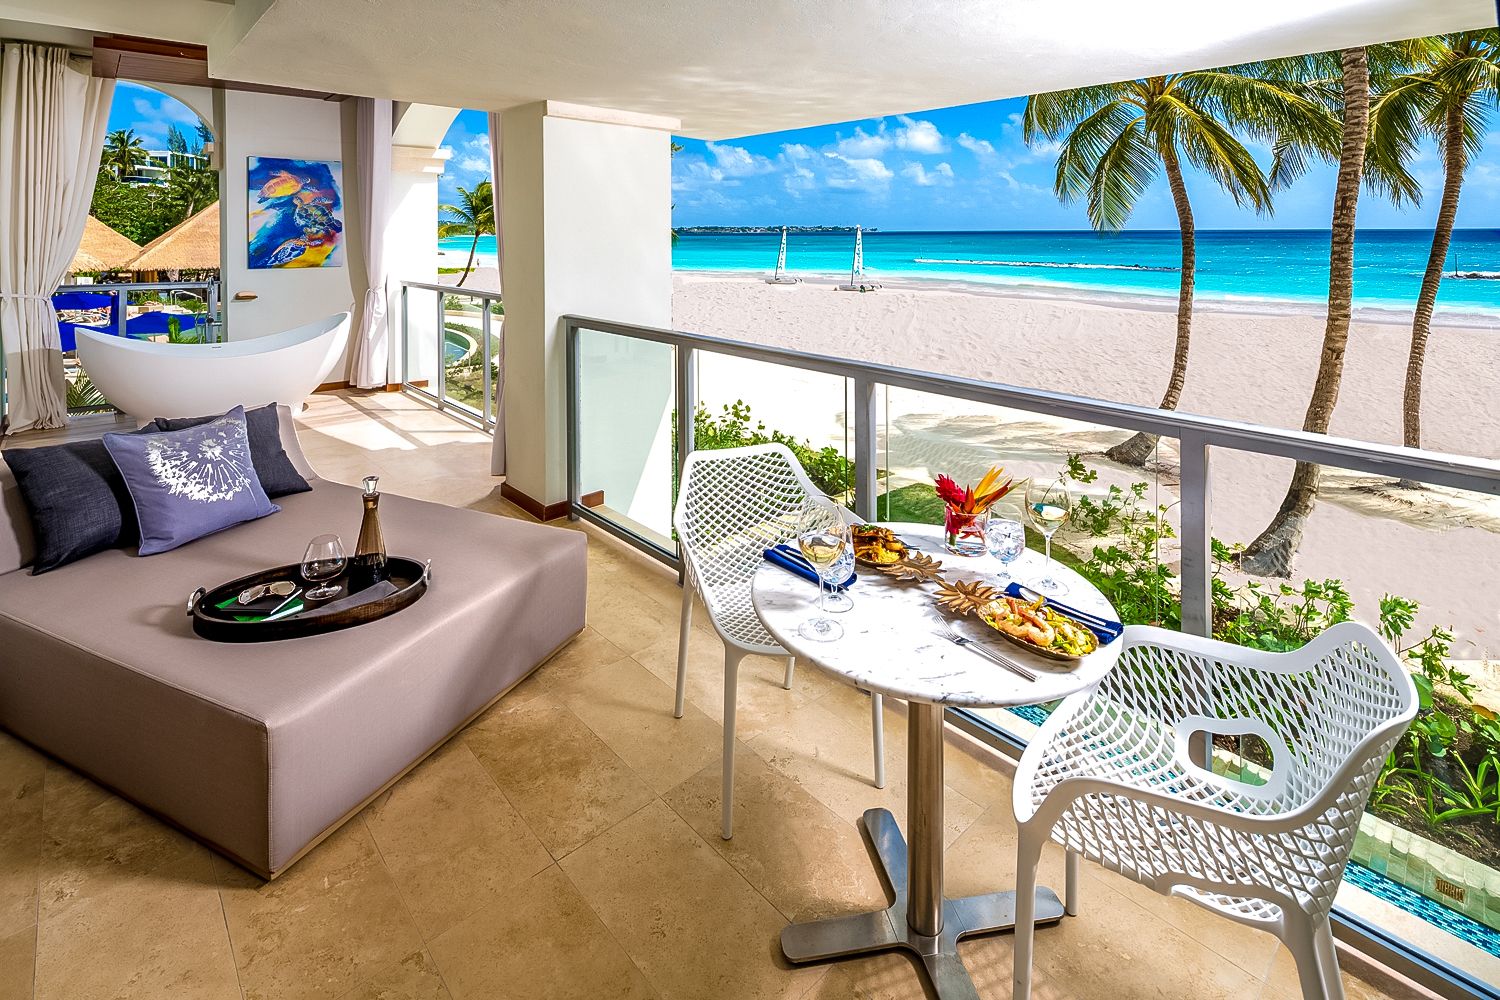 Sandals-Royal-Barbados-Beachfront-Butler-Suite-with-Balcony-Tranquility-Soaking-Tub